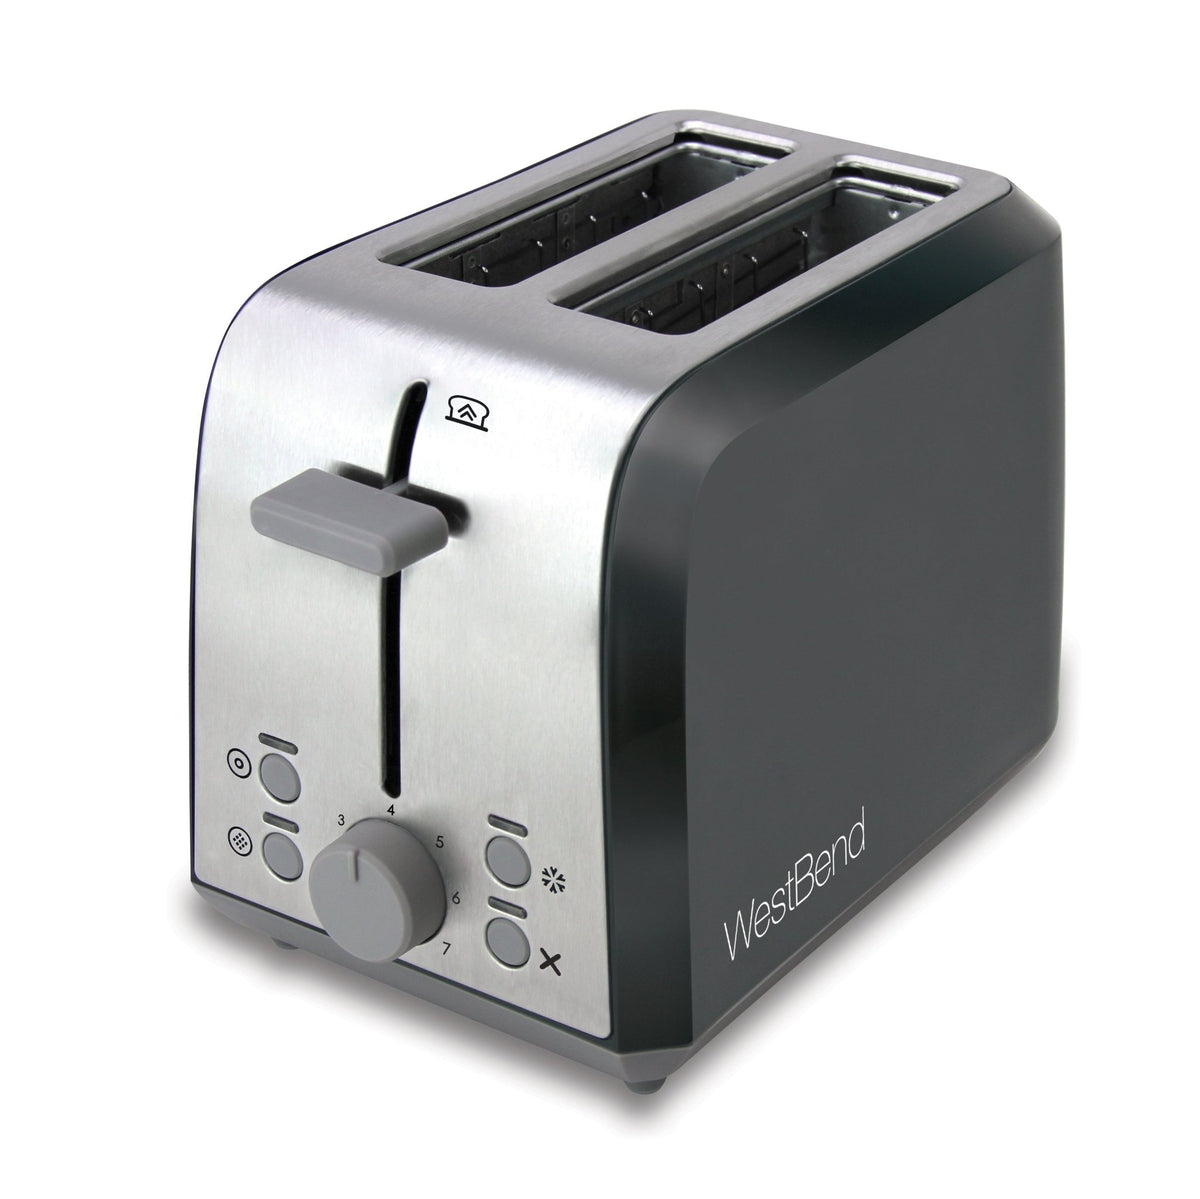 West Bend 2-Slice Toaster with Anti-Jam and Auto-Shut-Off, in  Black/Stainless Steel (78823)